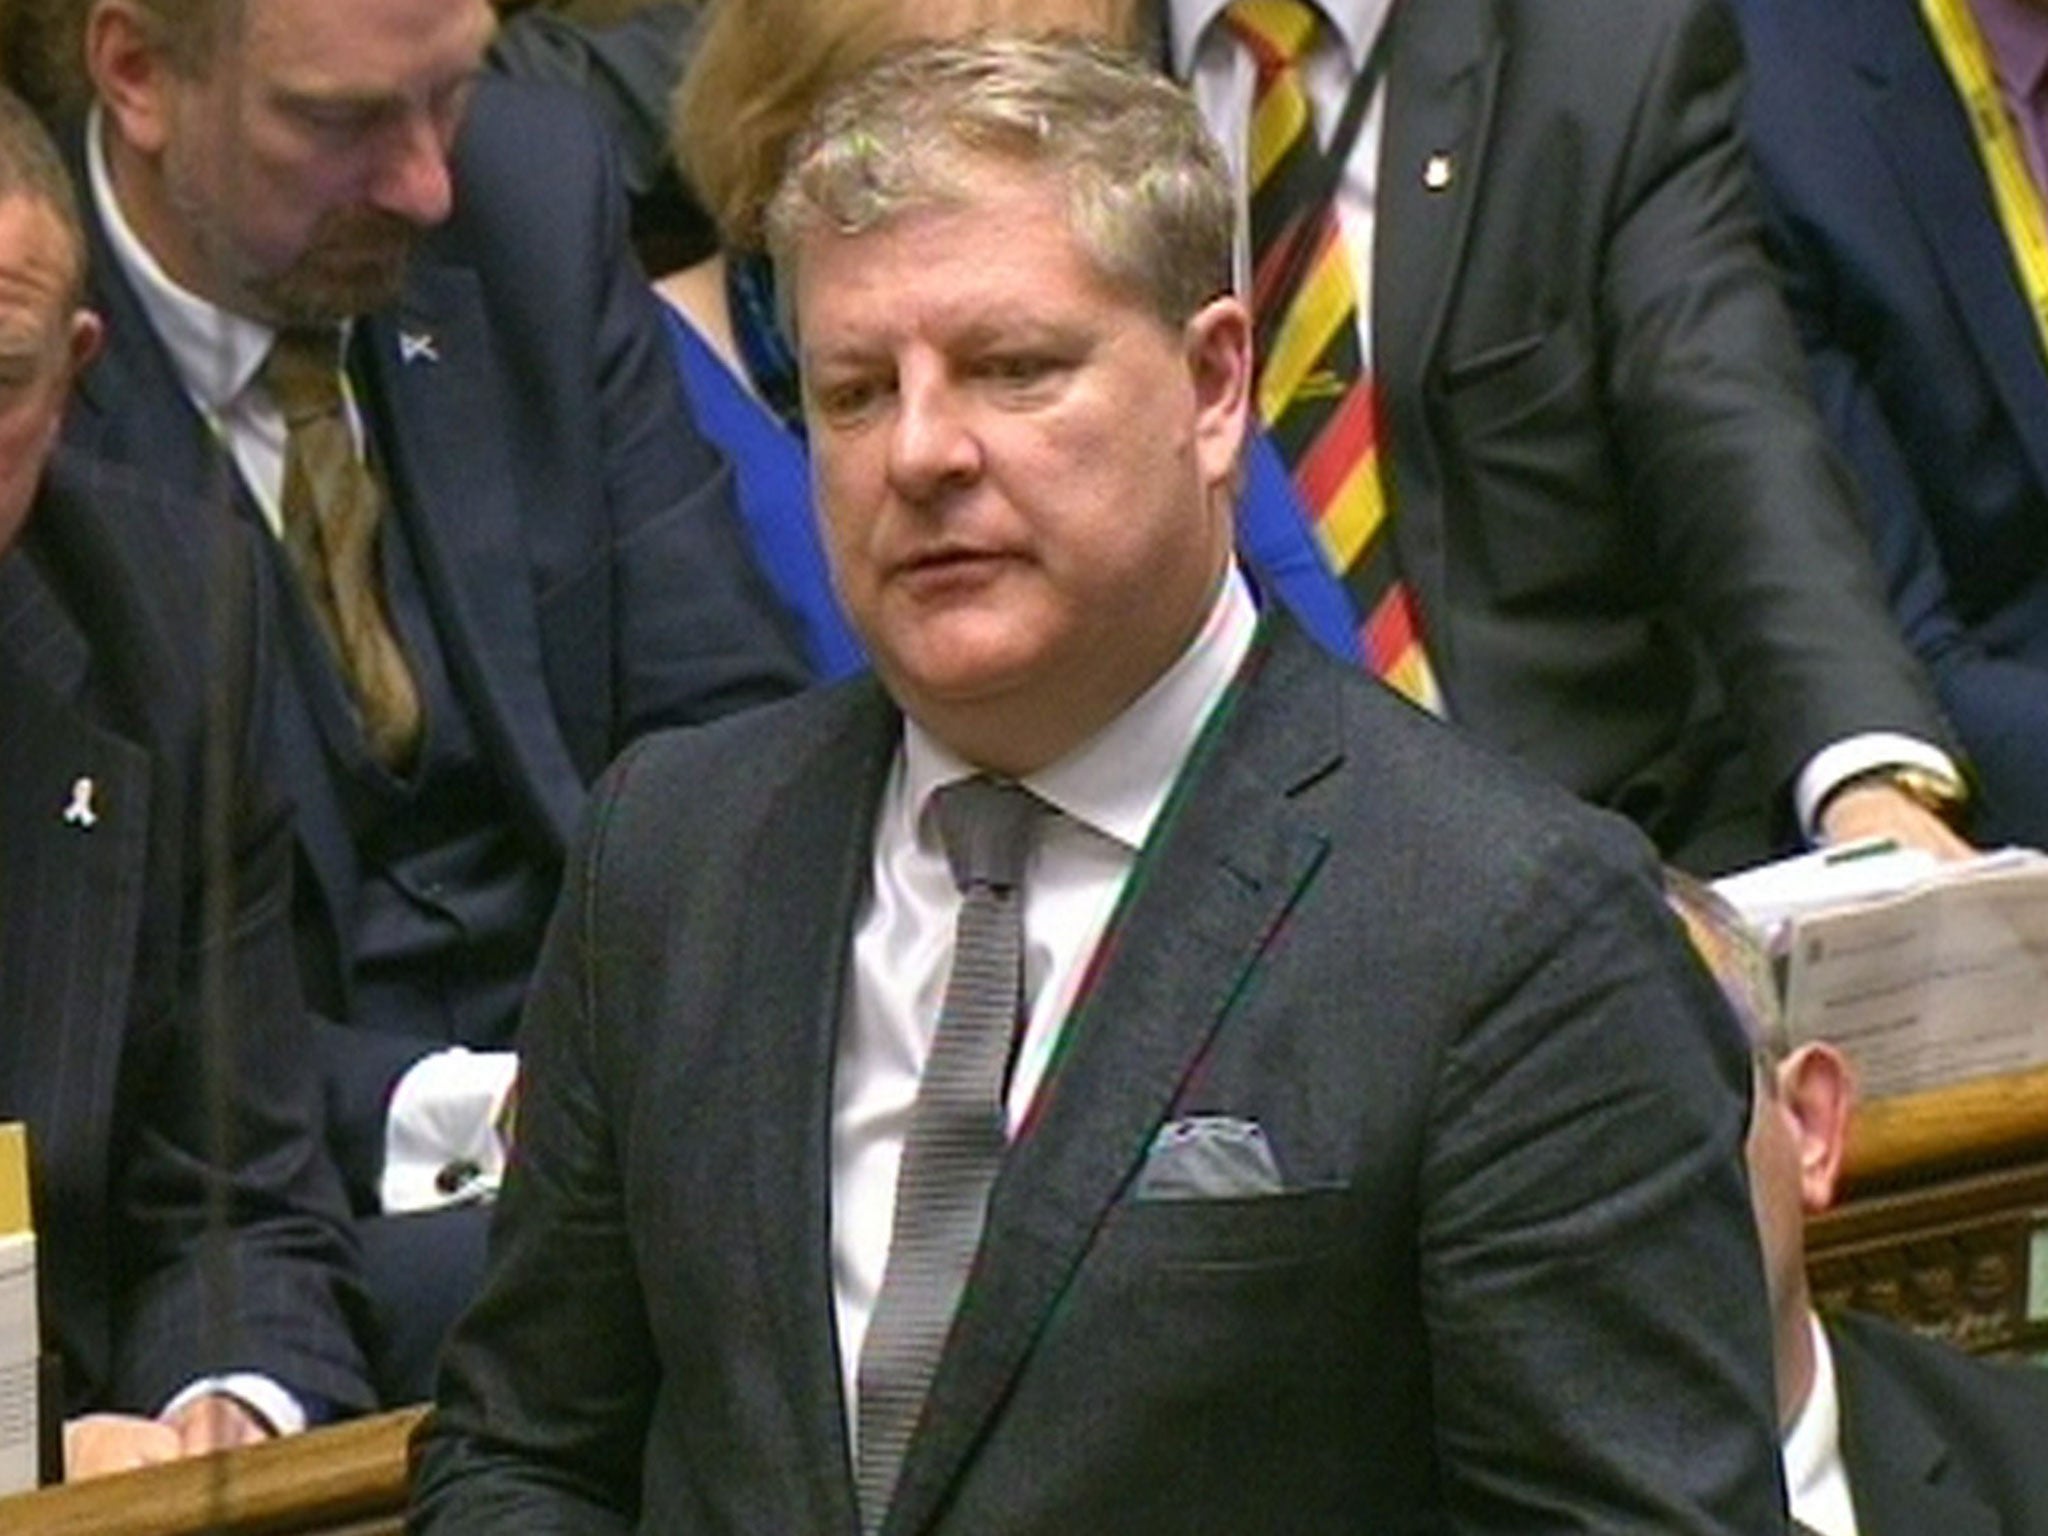 SNP Westminster leader Angus Robertson